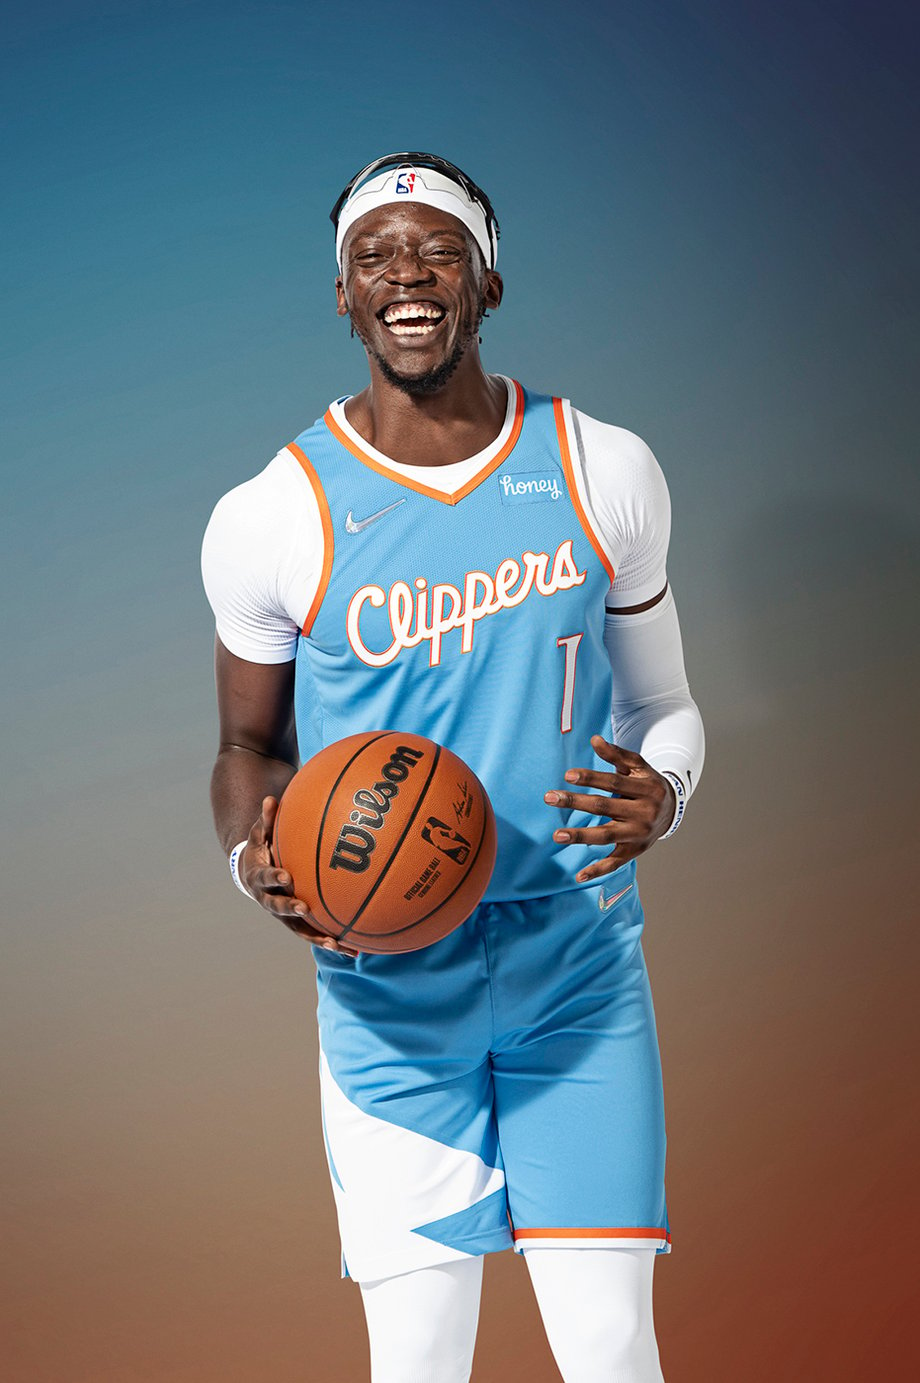 Point Guard Reggie Jackson of the LA Clippers basketball team shot by Erik Isakson